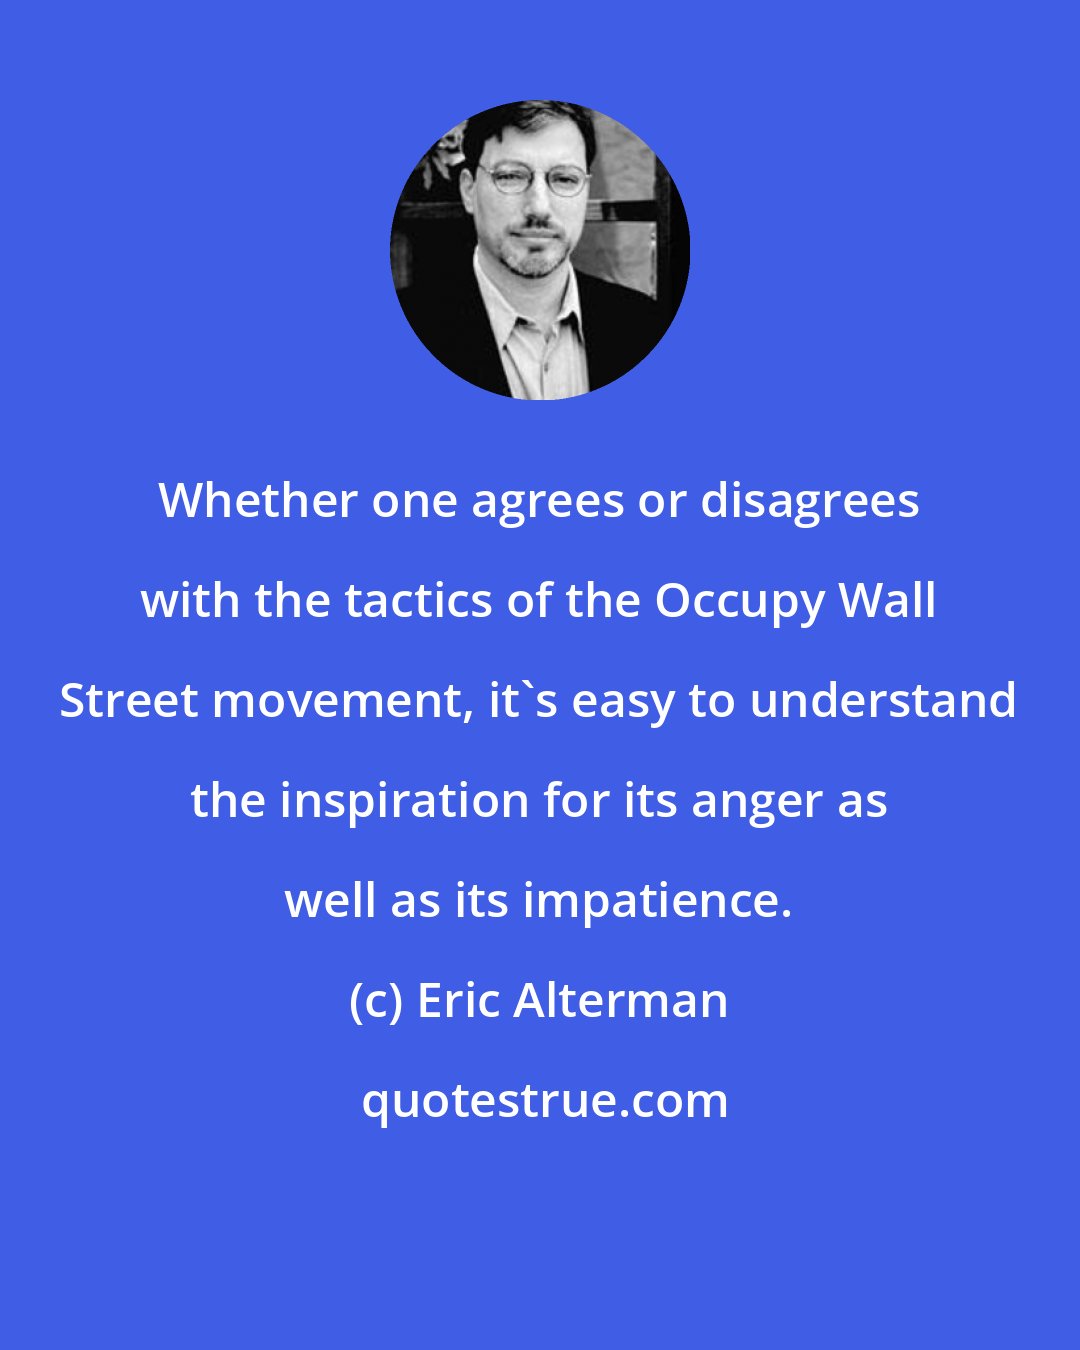 Eric Alterman: Whether one agrees or disagrees with the tactics of the Occupy Wall Street movement, it's easy to understand the inspiration for its anger as well as its impatience.